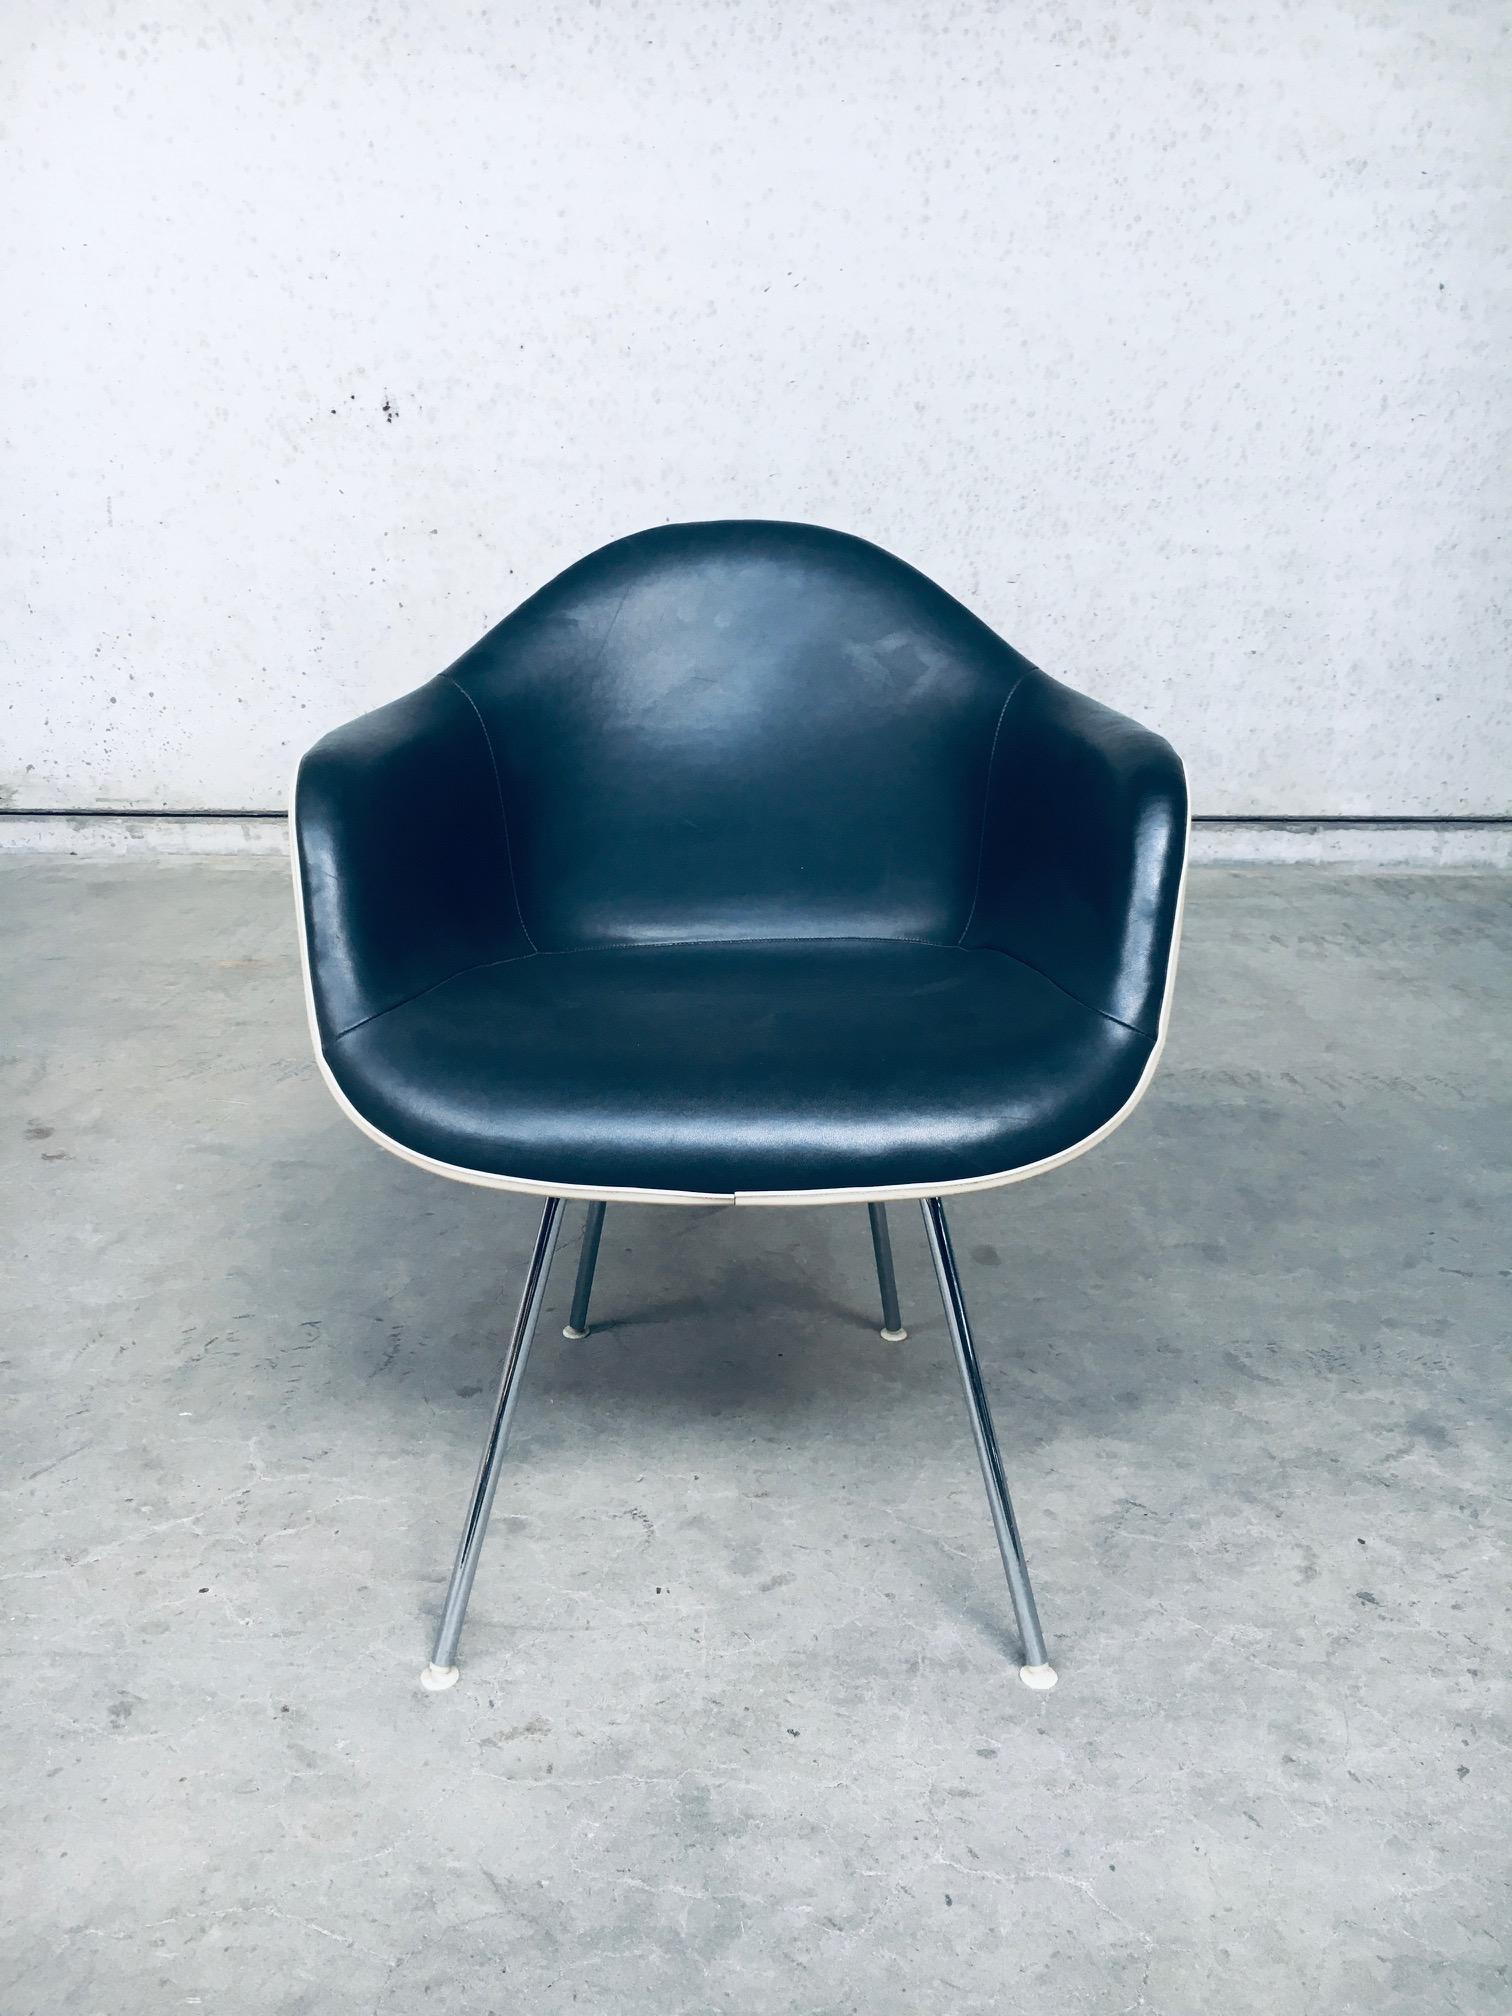 Mid-20th Century Mid-Century Black Leather Dax Armchair by Charles & Ray Eames for Herman Miller For Sale